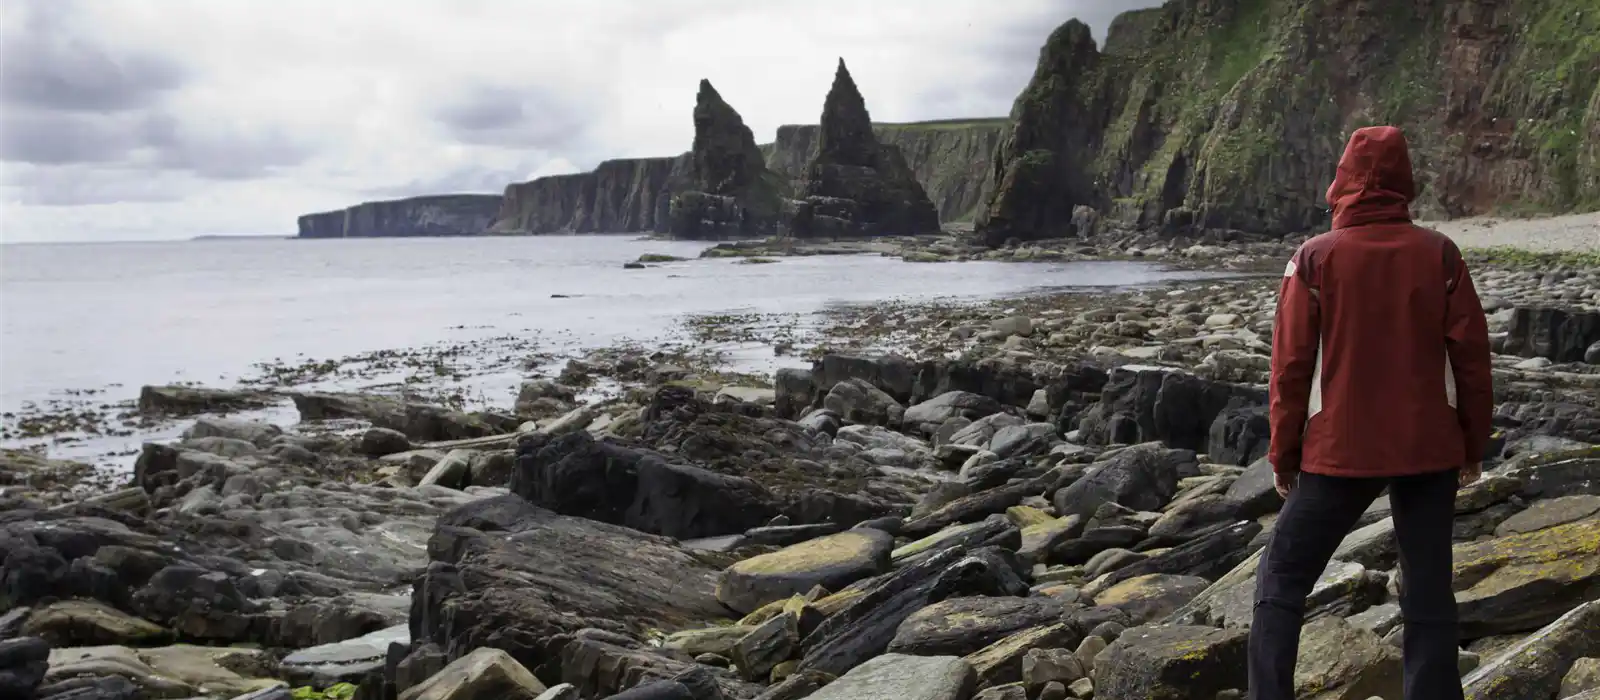 The Stacks of Duncansby, John O'Groats